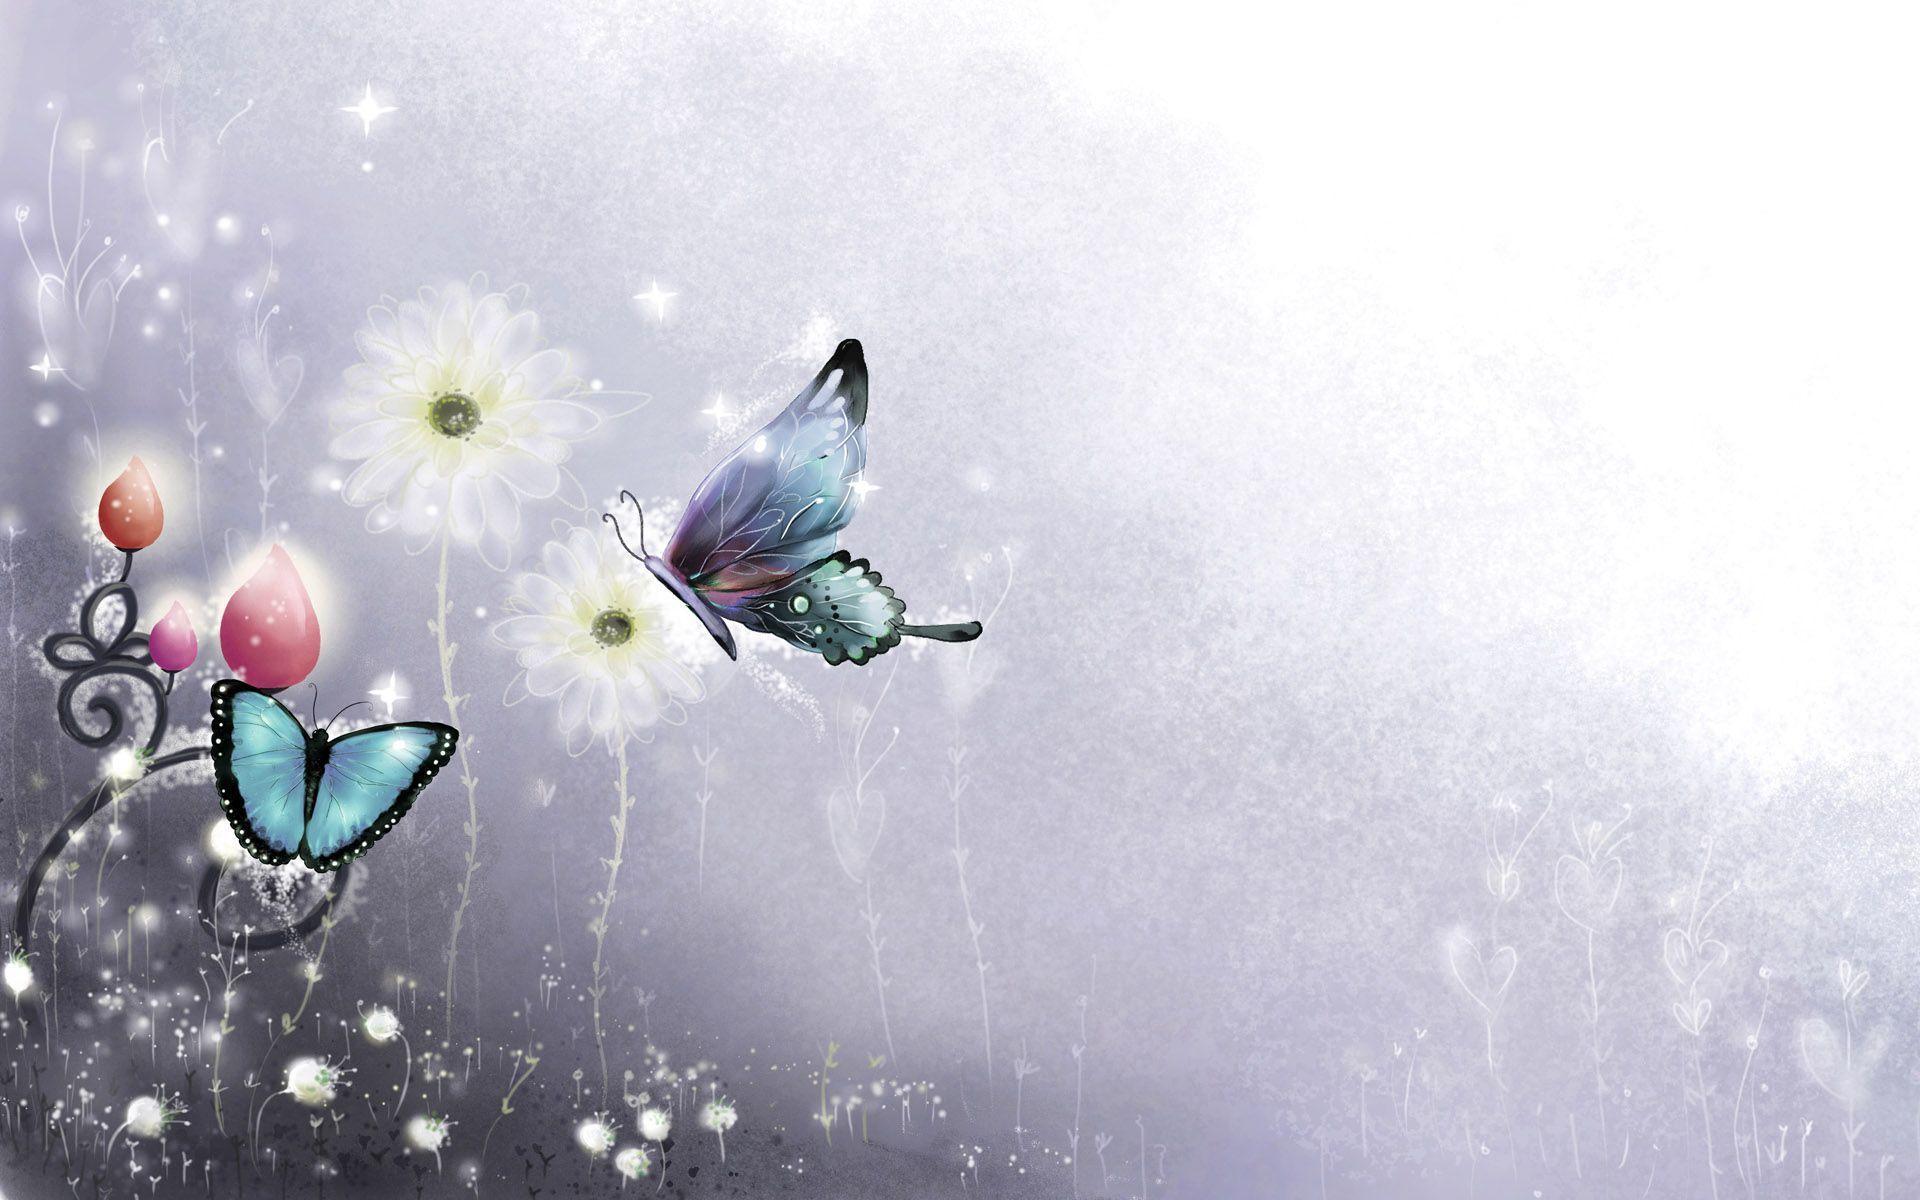 animated butterfly wallpaper background. vergapipe